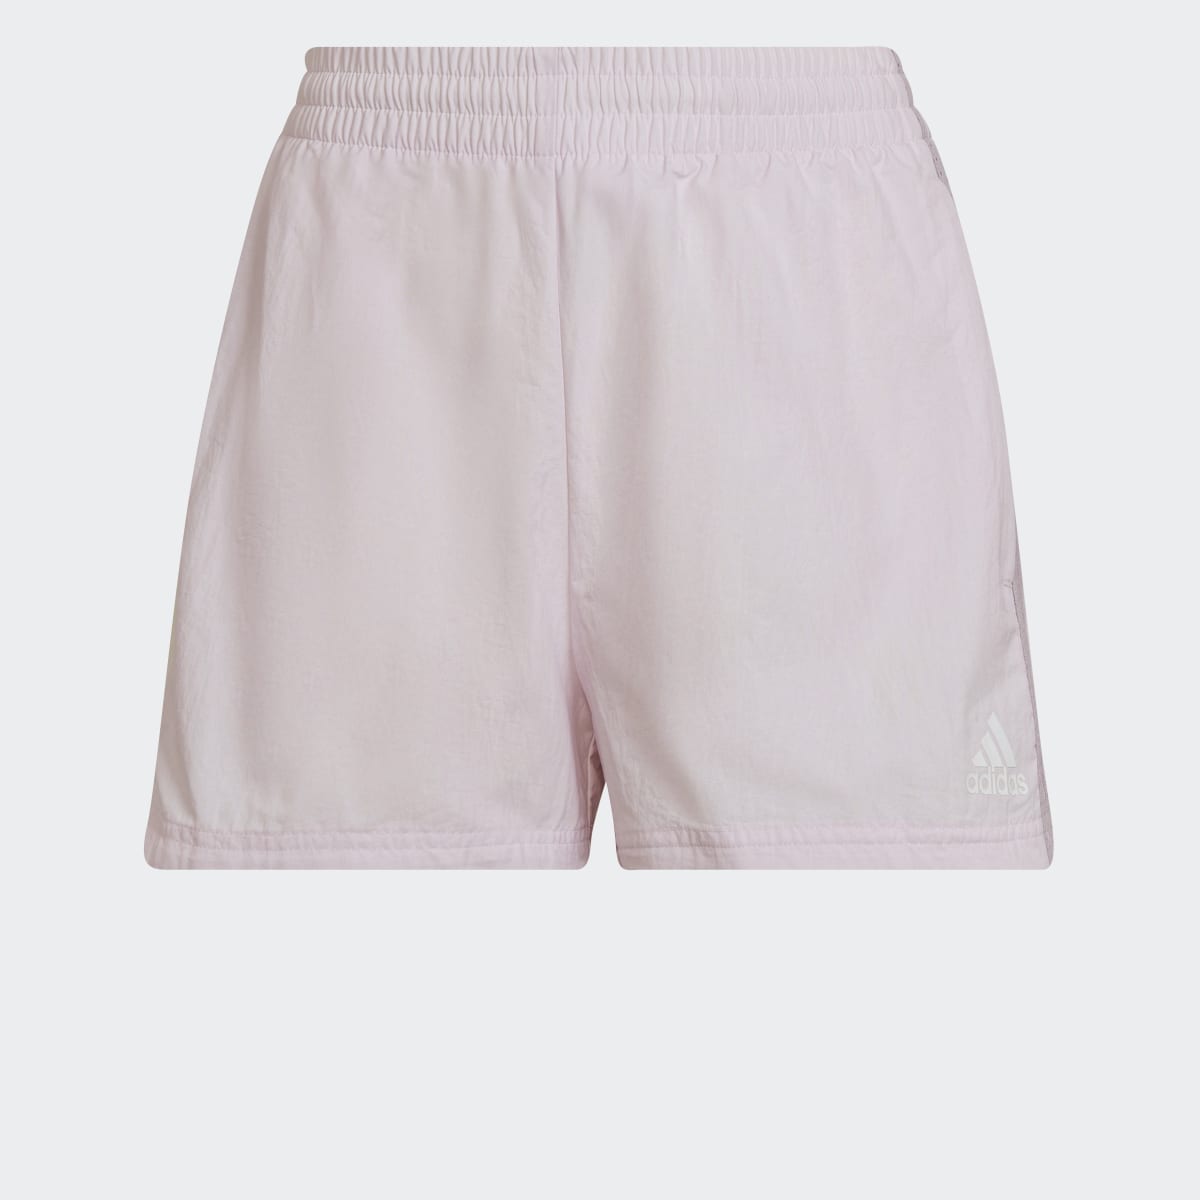 Adidas Short Essentials 3-Stripes Woven (Loose Fit). 4